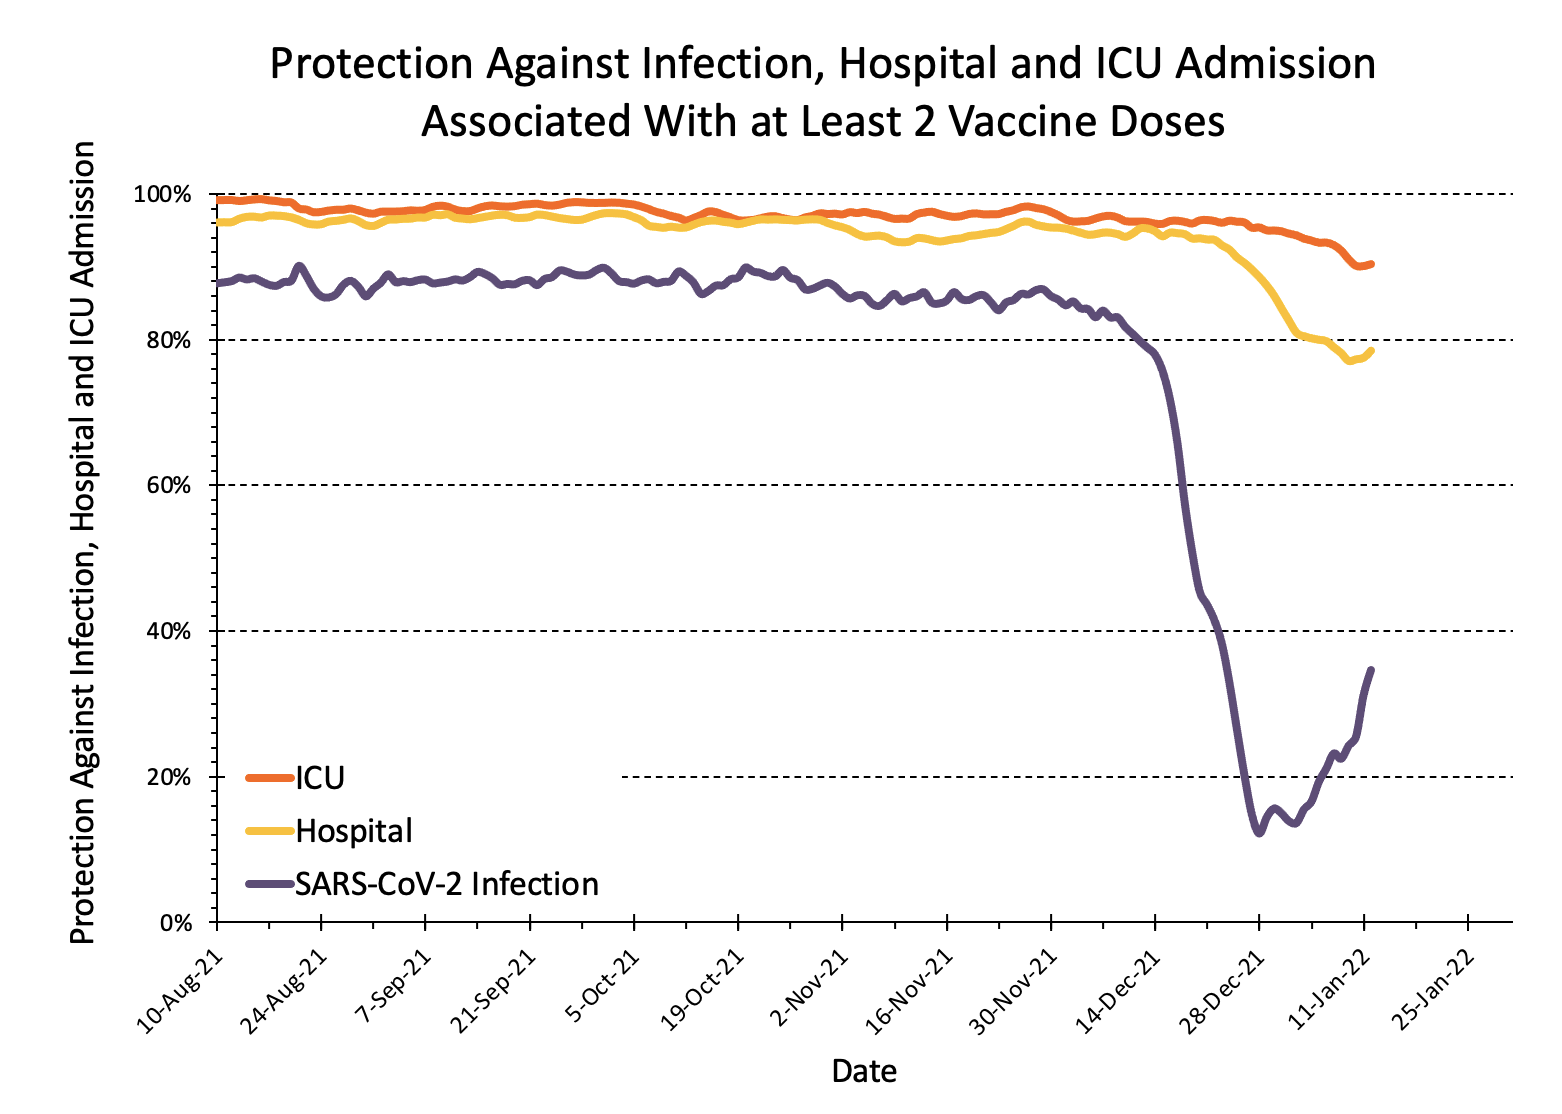 2022-01-12-Protection-Against-Infection-Hospital-and-ICU-Admission-with-2-Vaccine-Doses.png